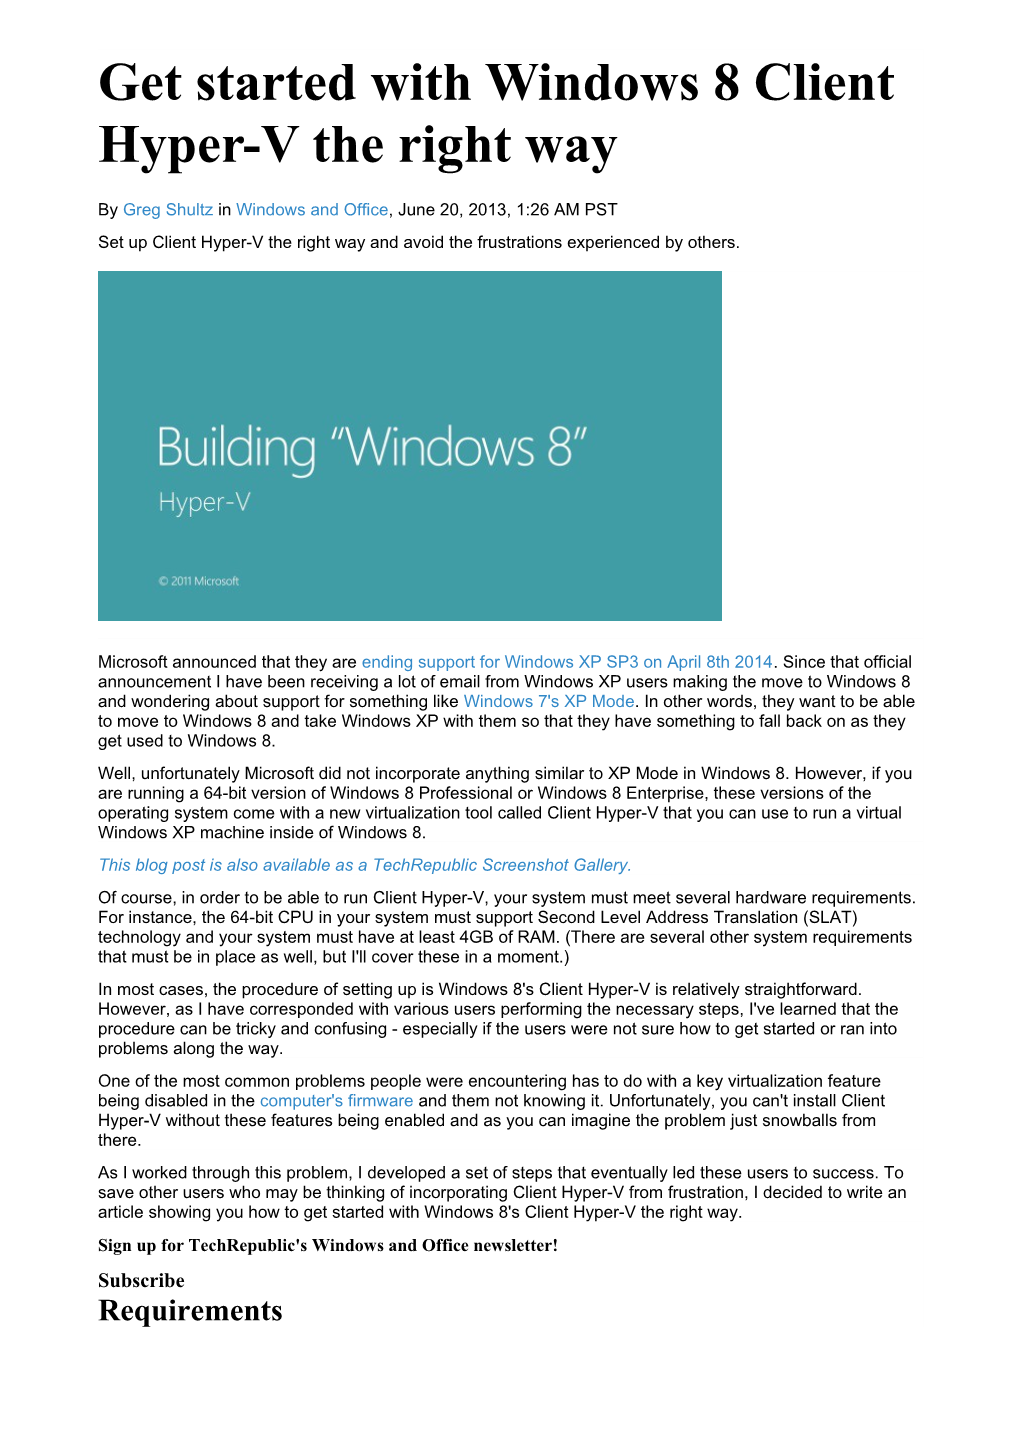 Getstarted with Windows 8 Client Hyper-V the Right Way